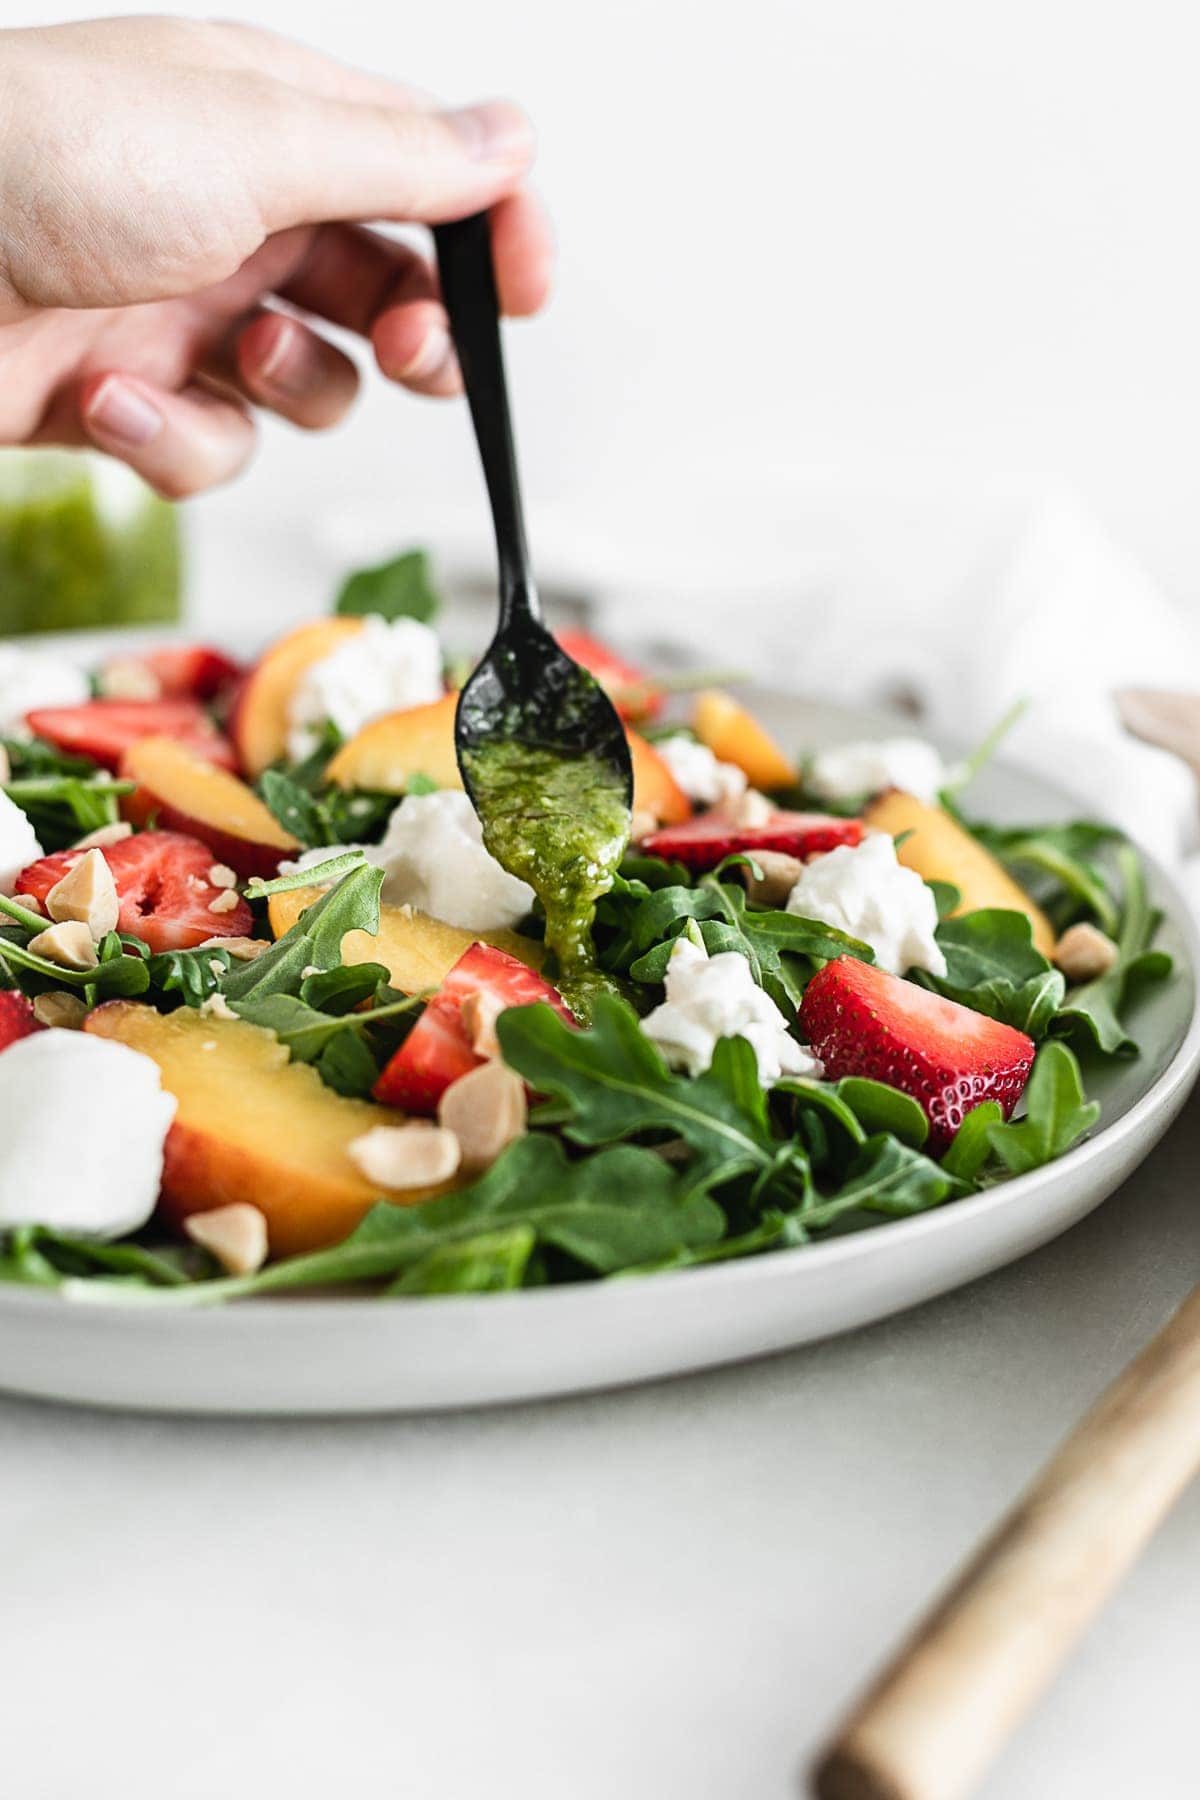 Use your sweet summer peaches and strawberries in this fresh and delicious peach strawberry burrata salad! It is a super easy summer salad that pairs perfectly with your favorite grilled dish. (vegetarian, gluten-free) | via livelytable.com